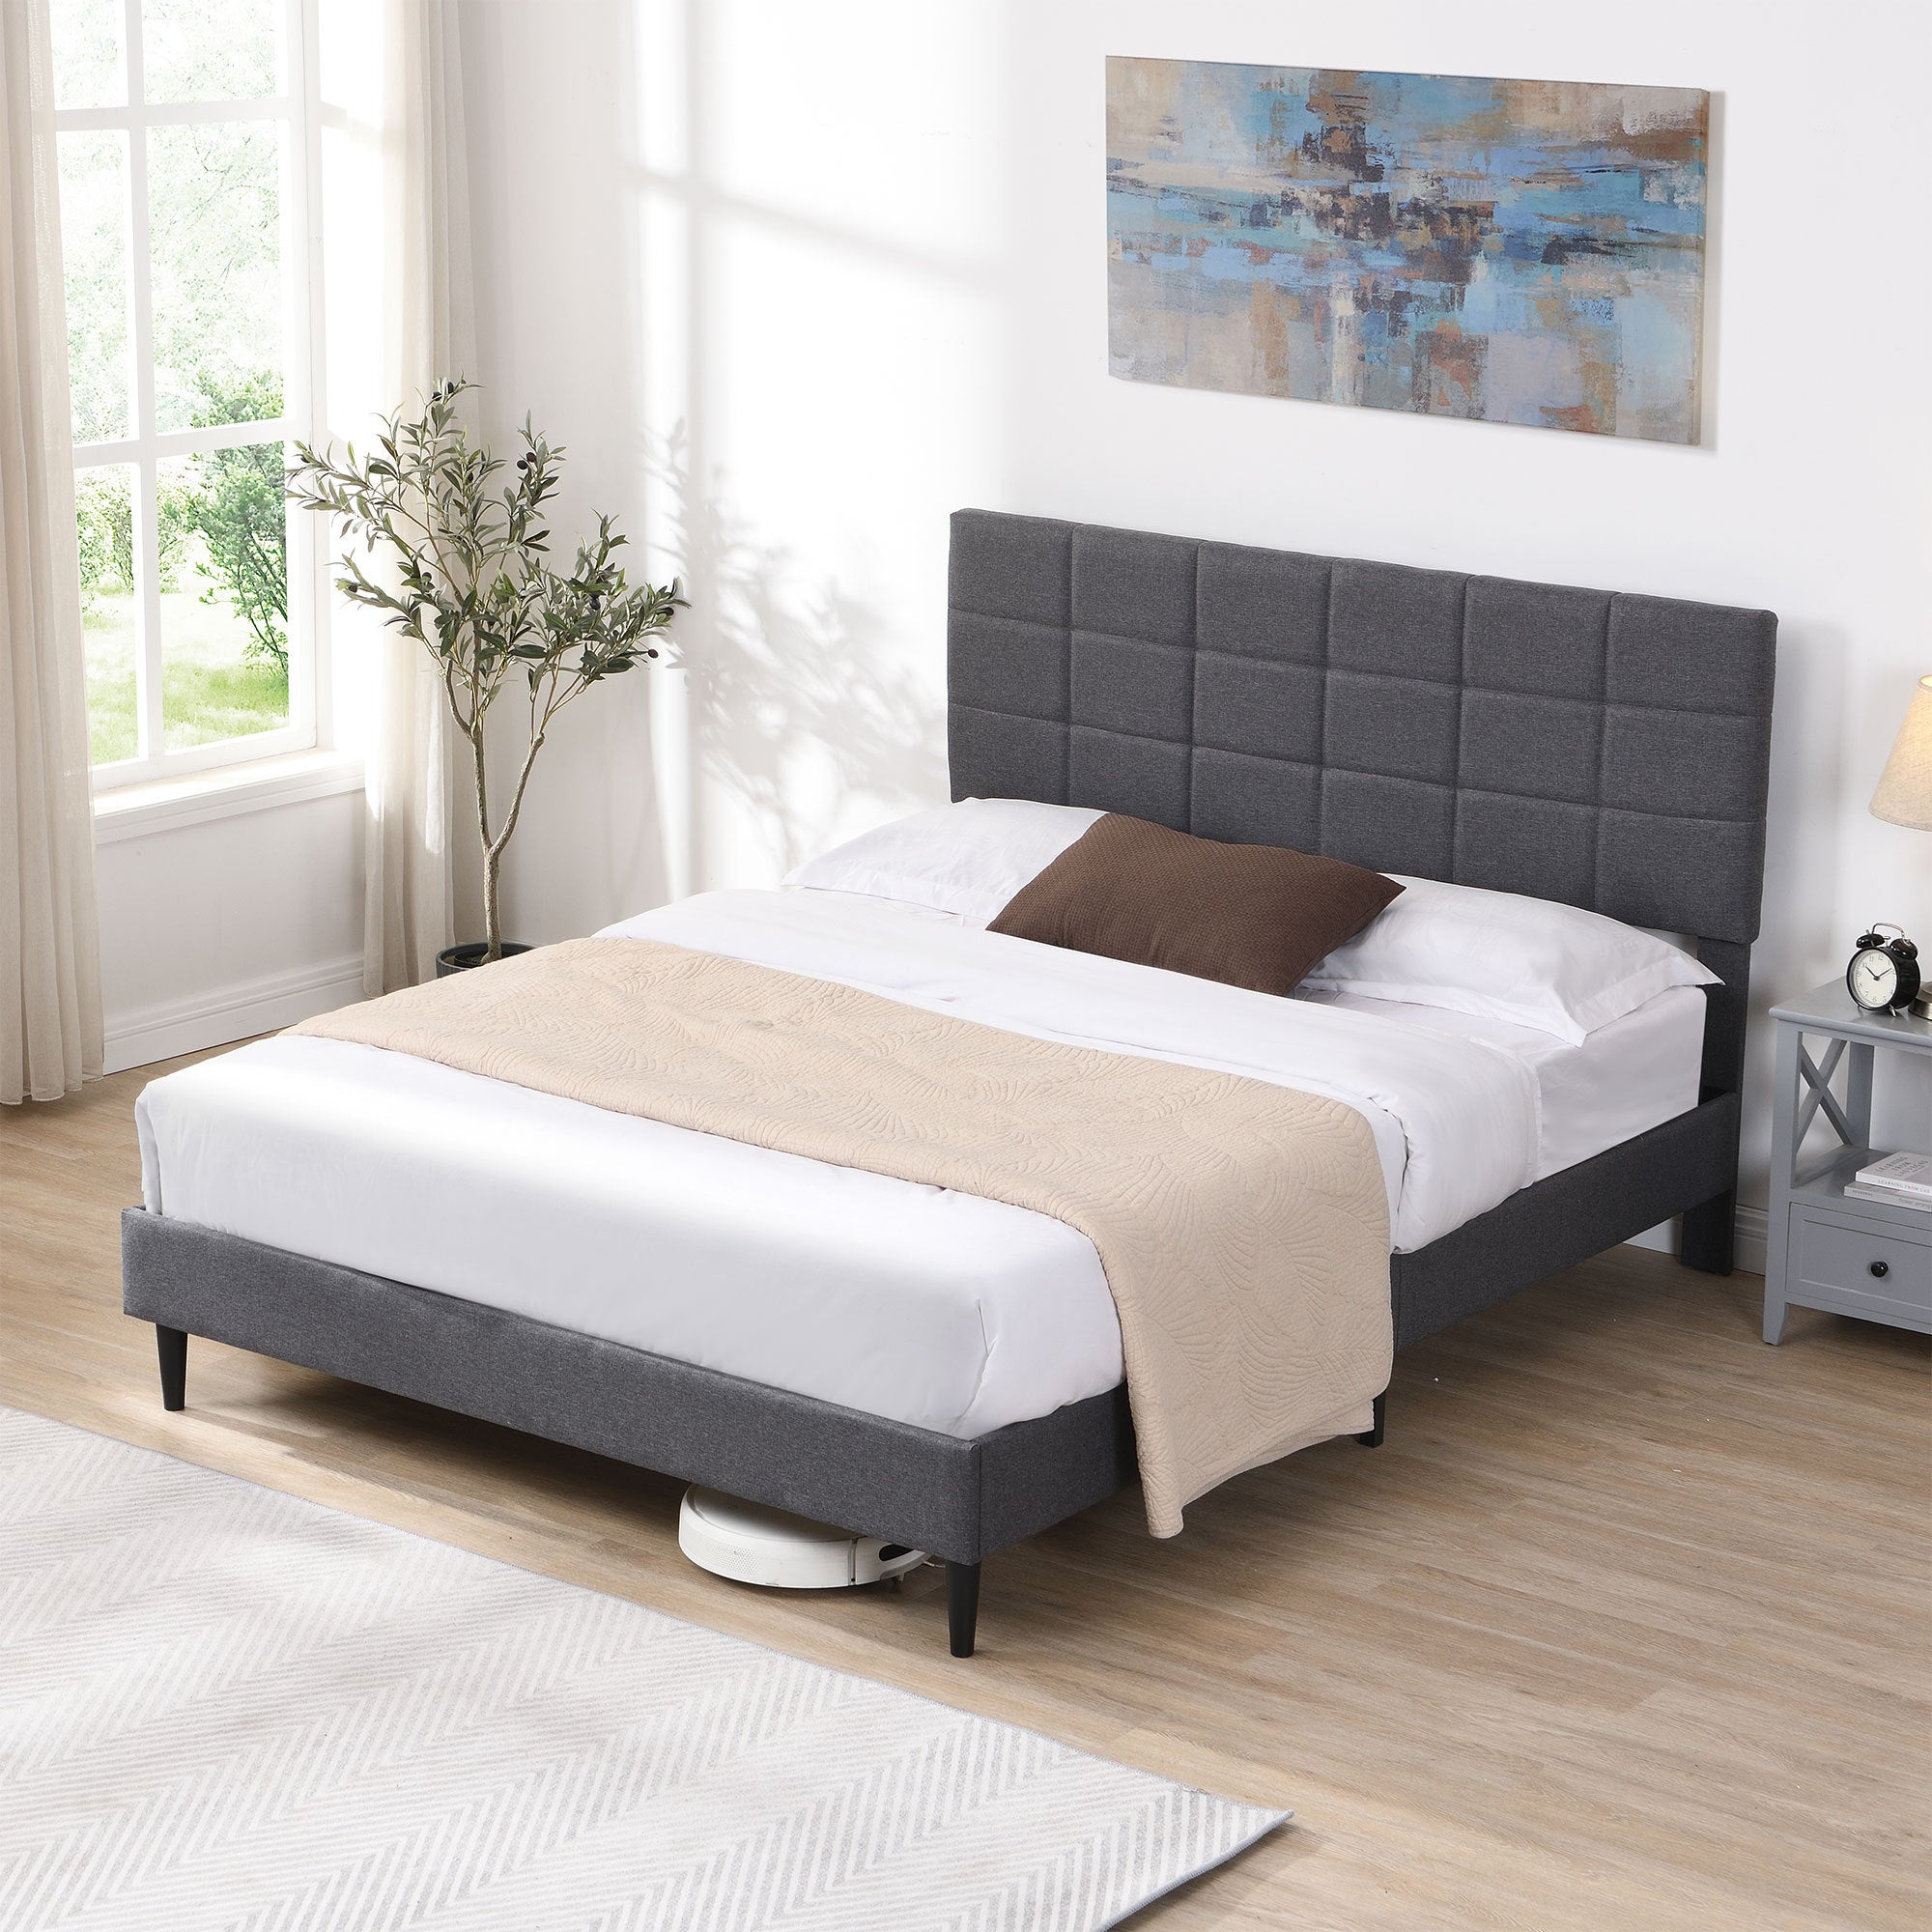 Queen Size Platform Bed Frame with Fabric Upholstered Headboard and Wooden Slats, No Box Spring Needed/Easy Assembly, Gray